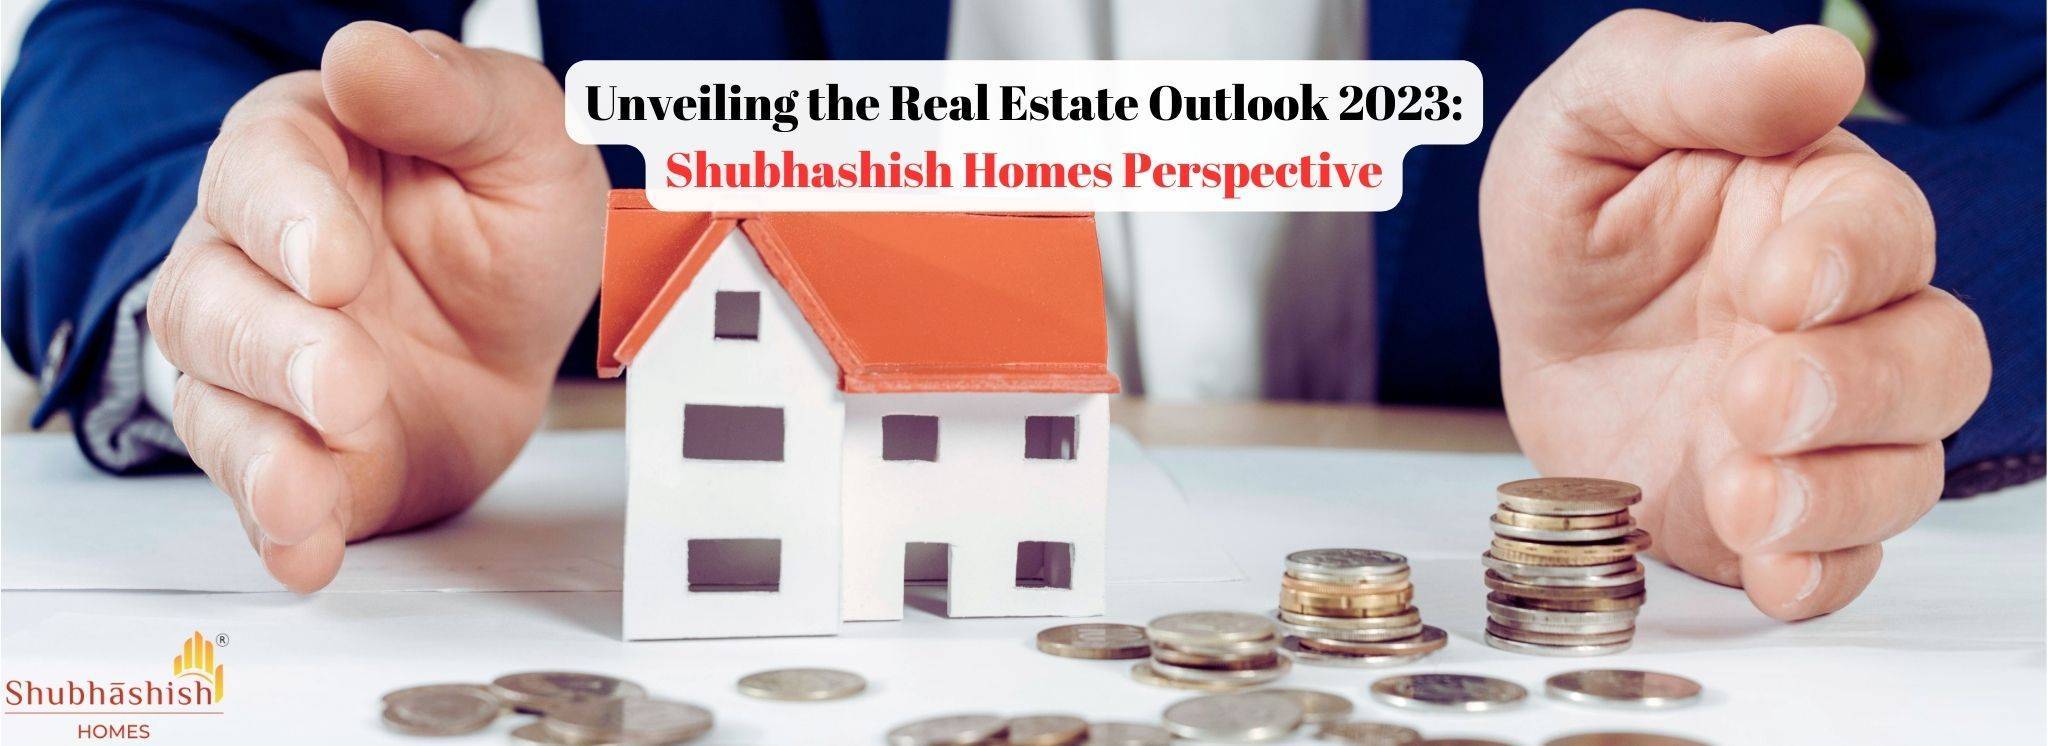 Unveiling the Real Estate Outlook 2023: Shubhashish Homes Perspective